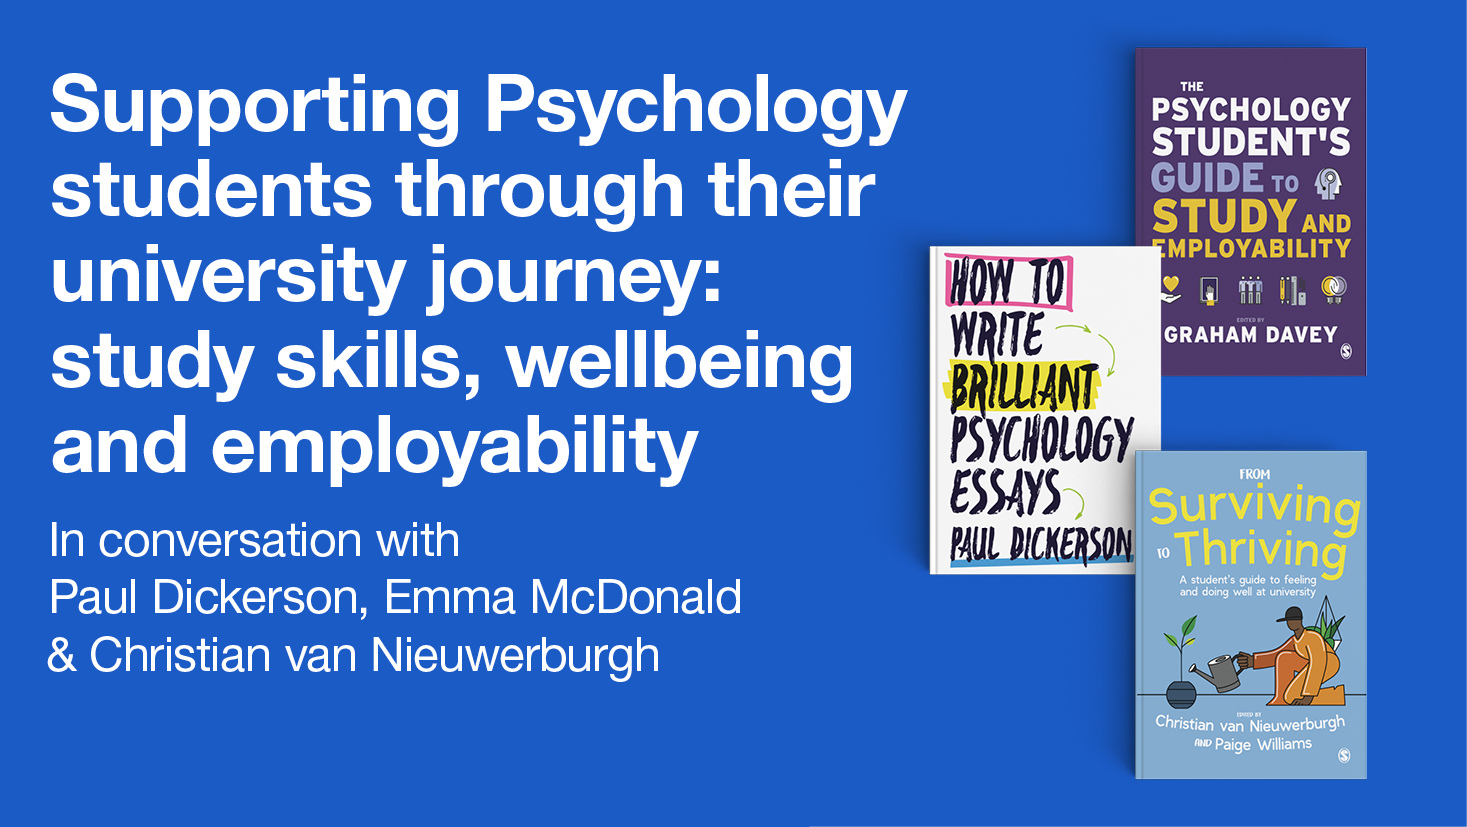 Supporting Psychology students through their university journey: Study skills, wellbeing and employability 